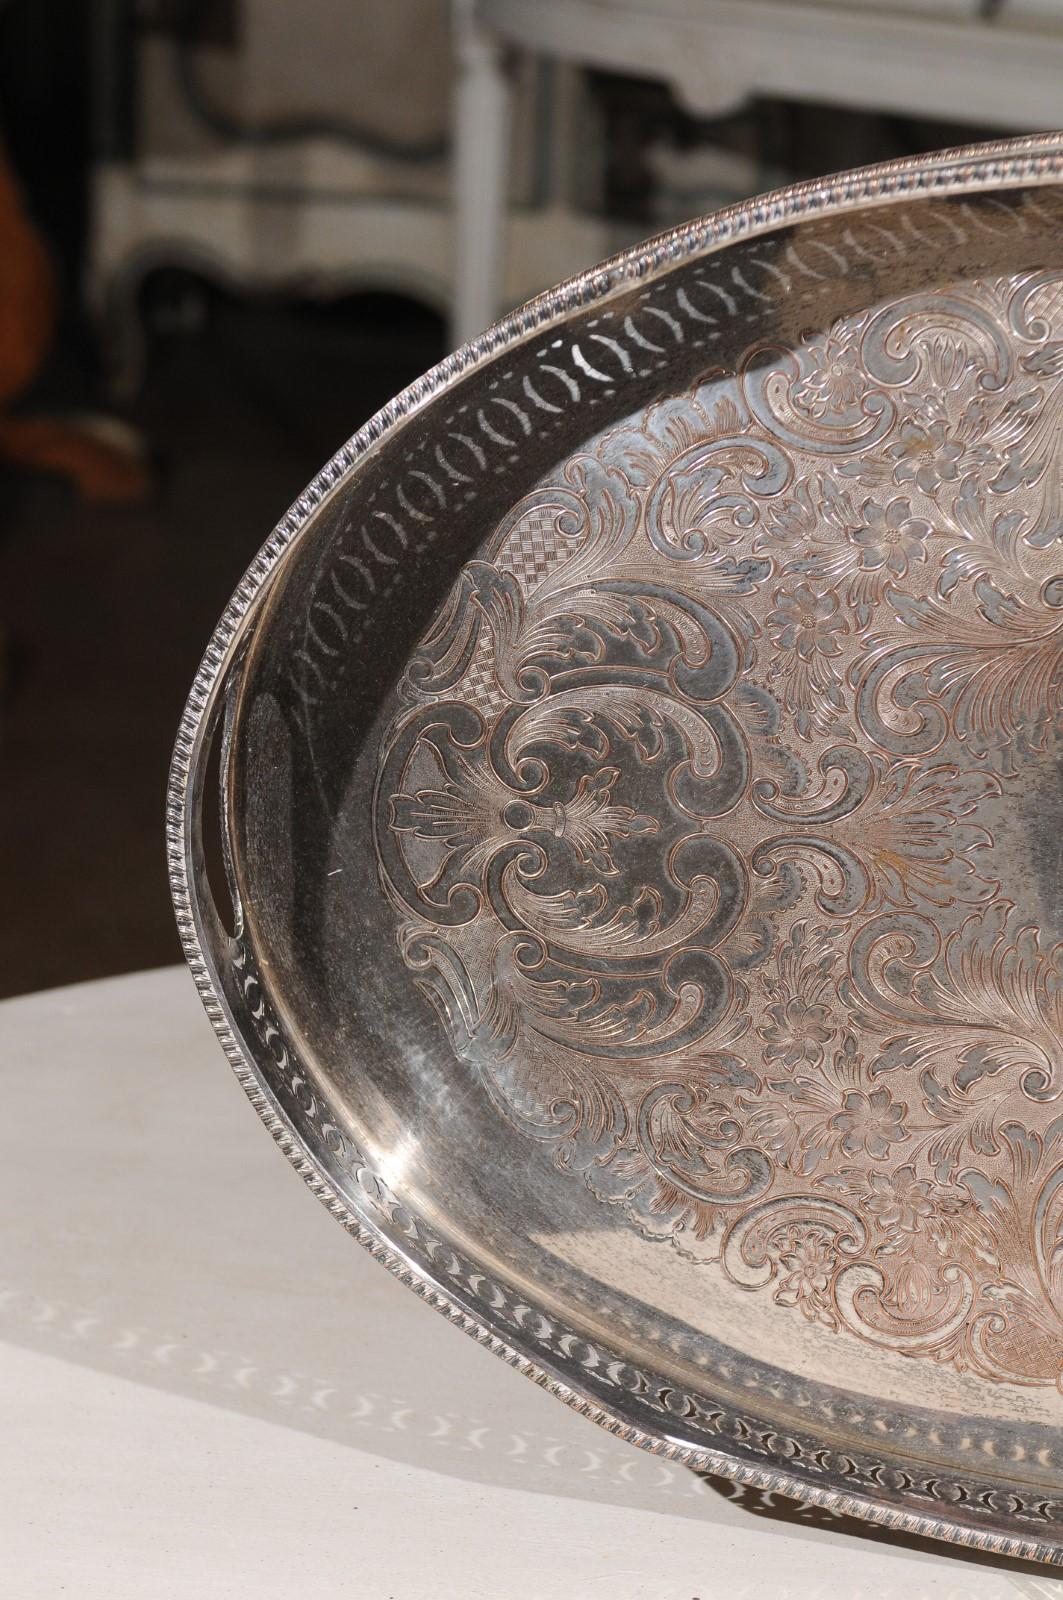 English Edwardian Period Silver Plated Tray with Pierced Motifs and C-Scrolls In Good Condition For Sale In Atlanta, GA